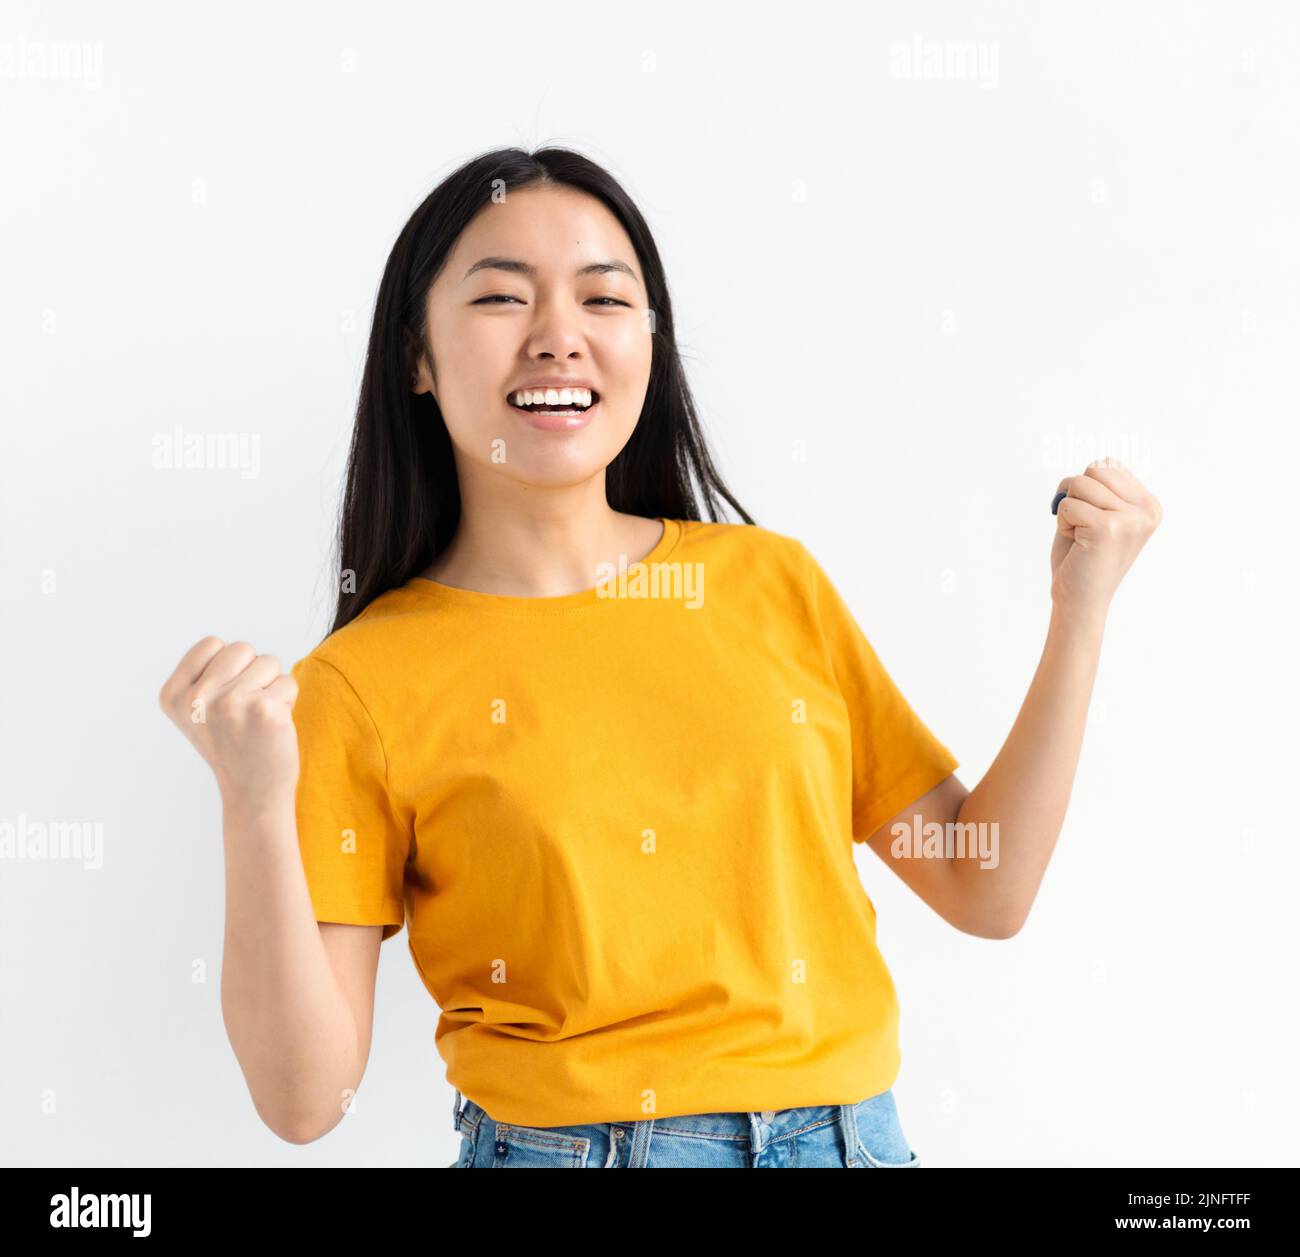 Portrait of joyful Asian woman rejoicing say yes looking happy and celebrating victory standing over white background Stock Photo